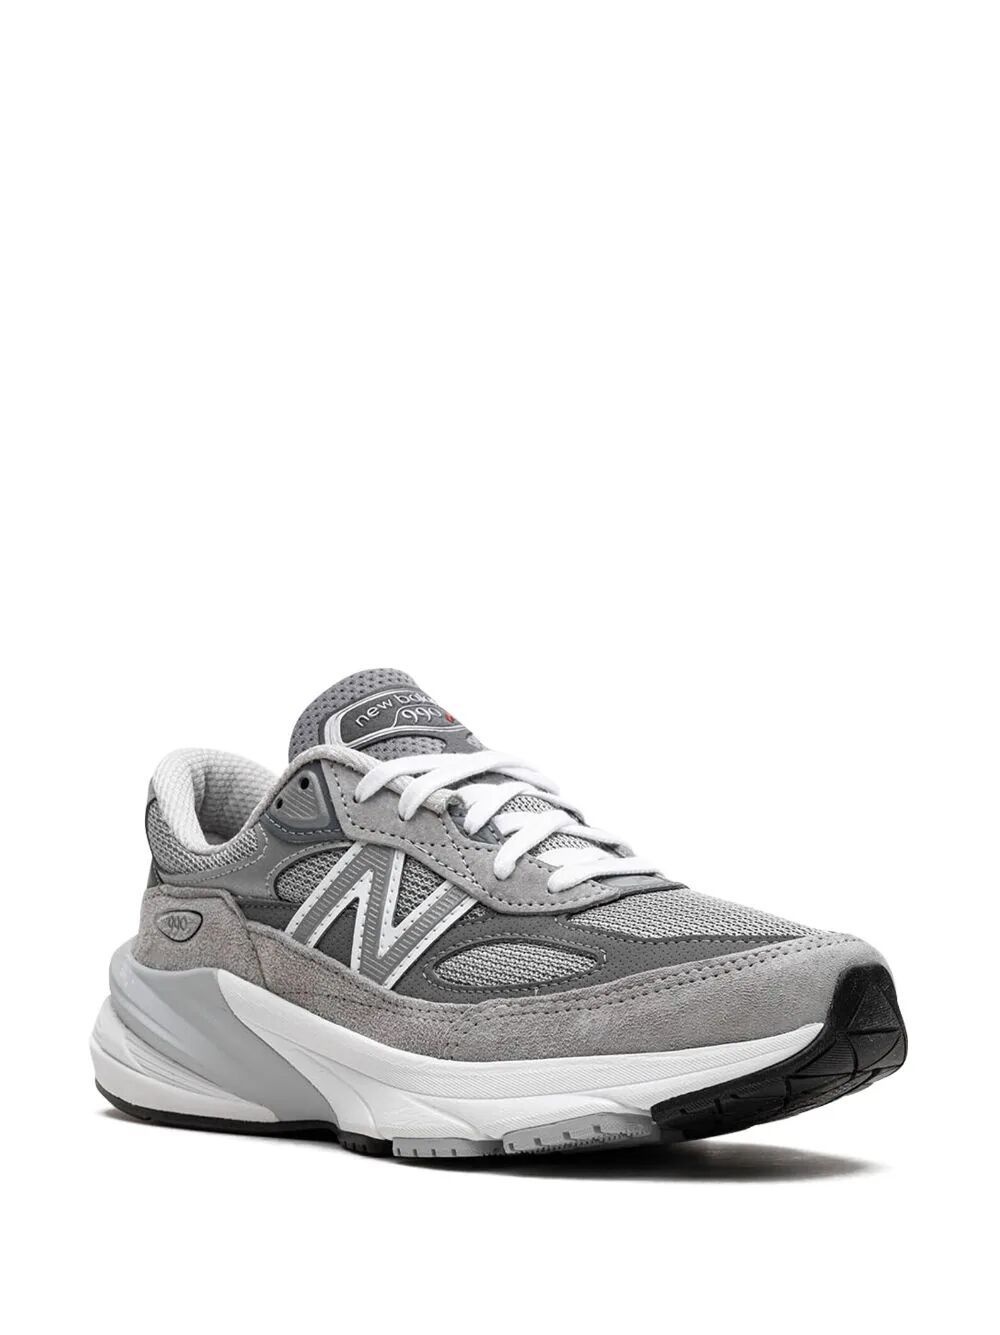 990V6 NEW BALANCE SNEAKERS - 2